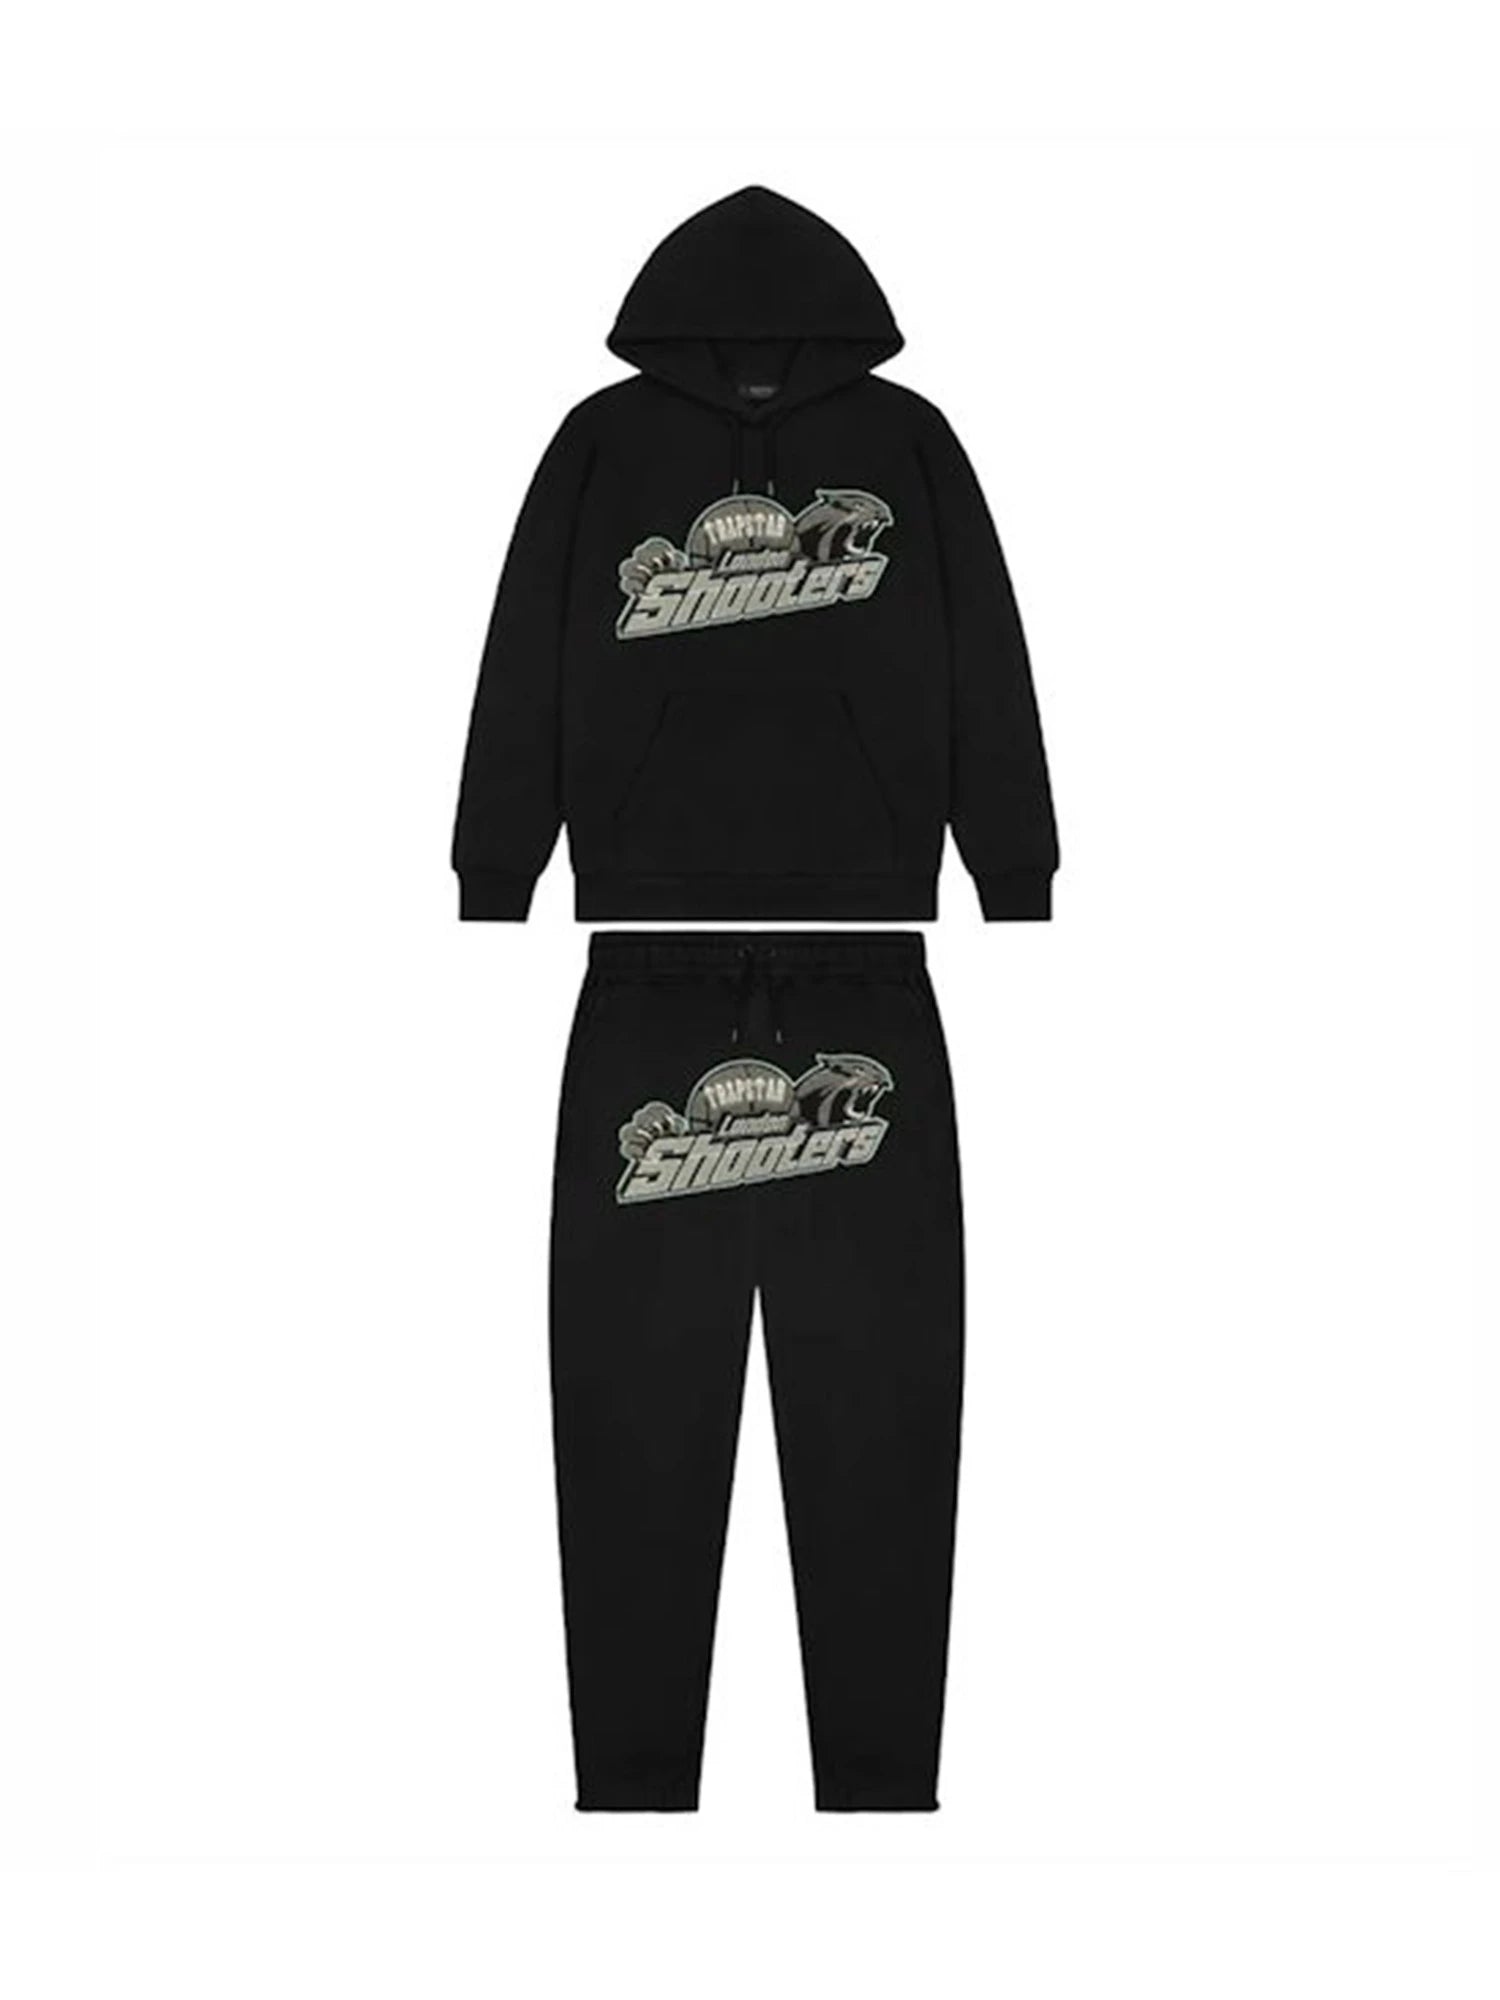 Trapstar Shooters Tracksuit Black/Teal